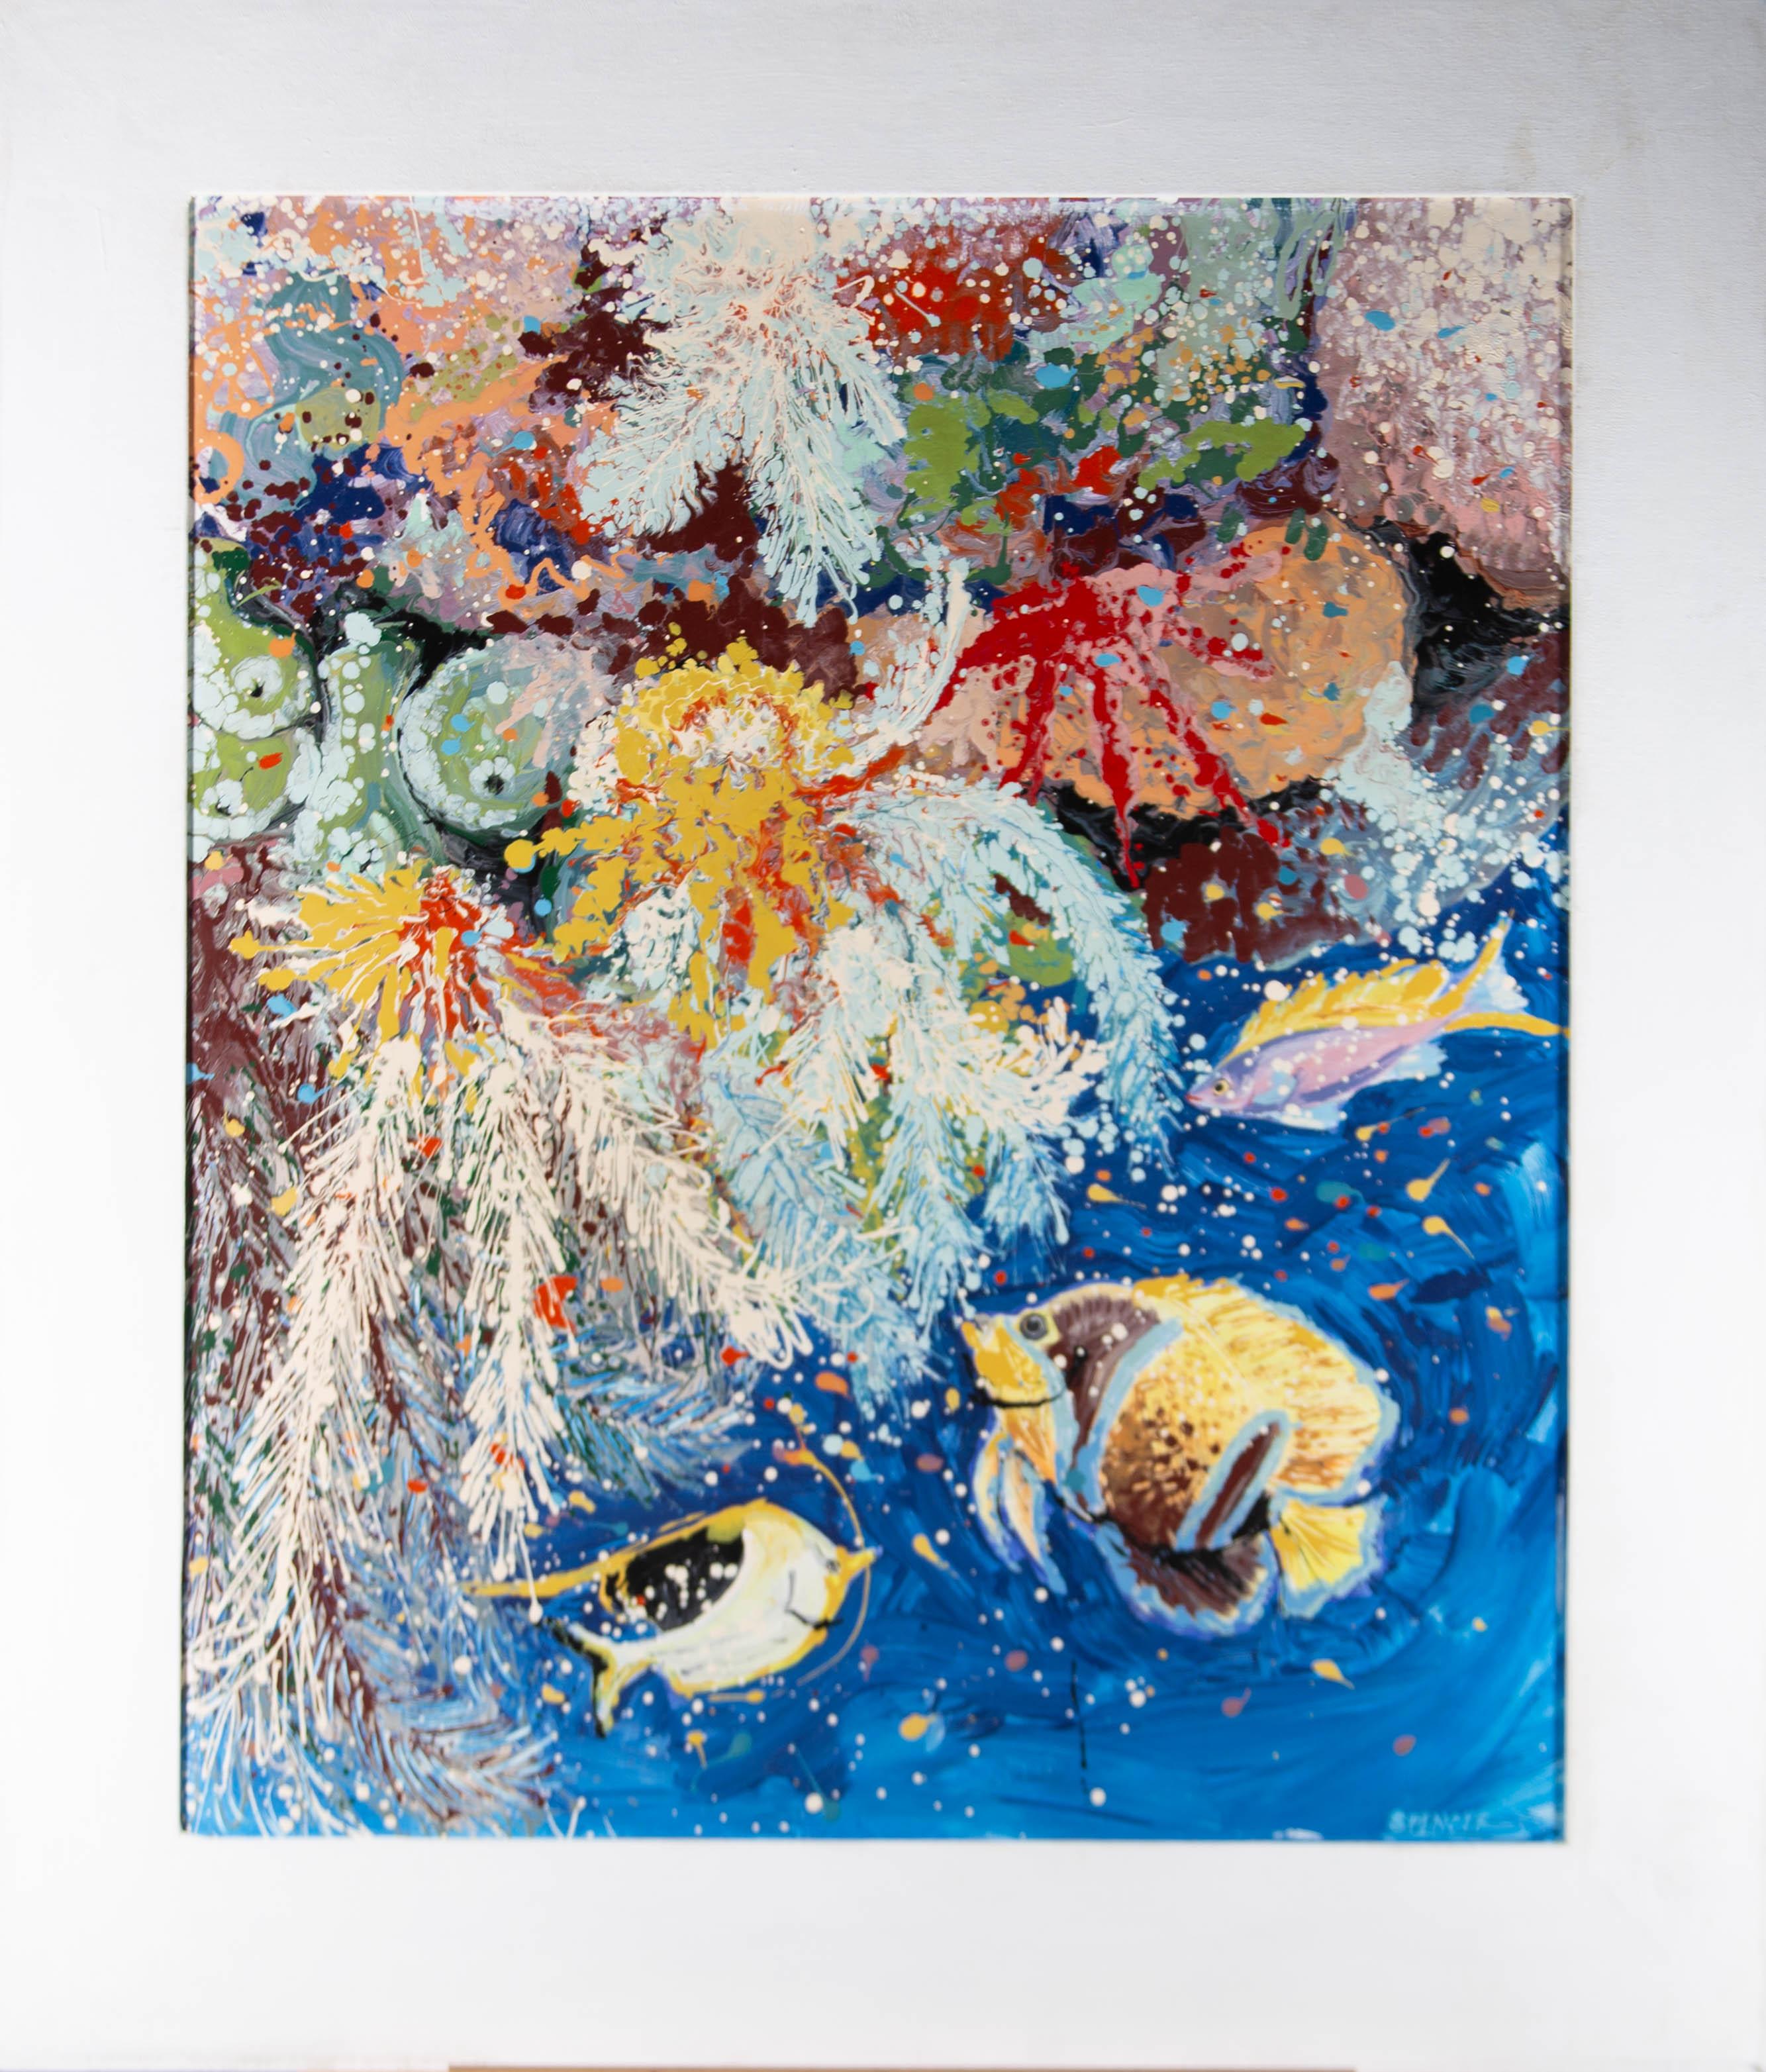 Enamel paint dances and swirls in a cacophony of colour to depict a coral bursting with life and beauty. The artwork is signed and inscribed on the reverse and is well presented in a whitewashed canvas mount.

On Board.